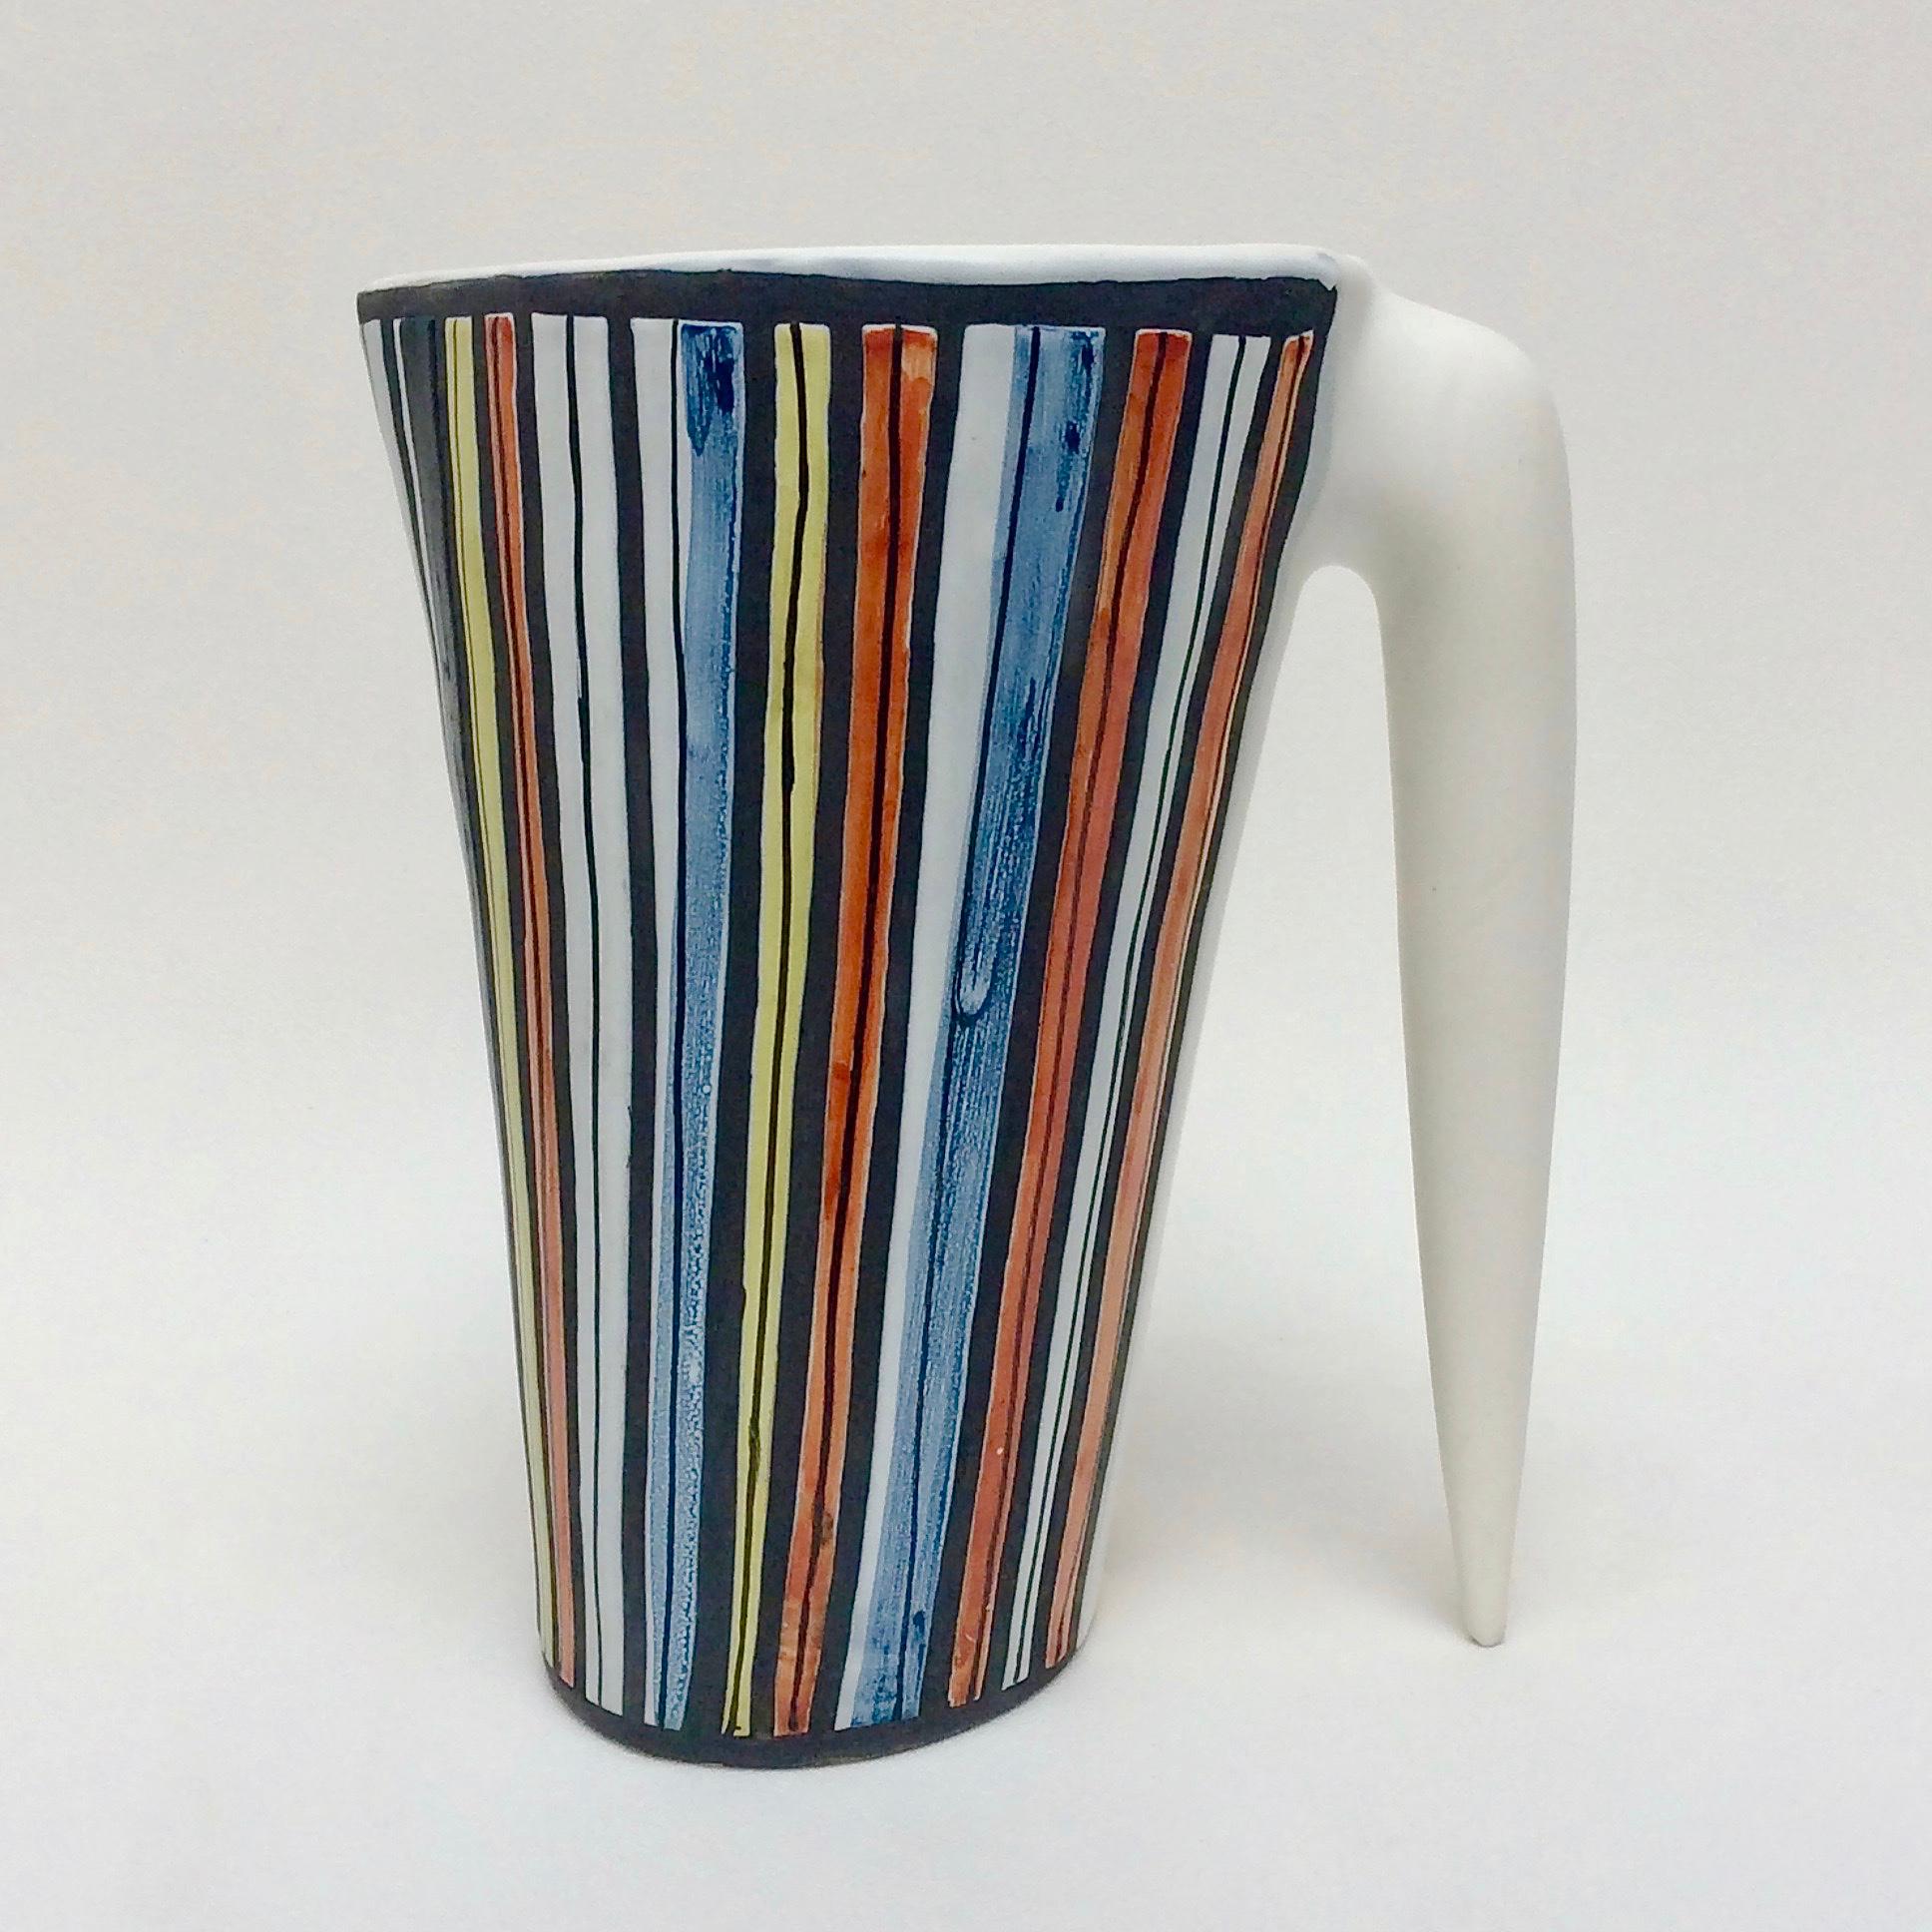 French Roger Capron Signed Ceramic, circa 1953, Vallauris, France.